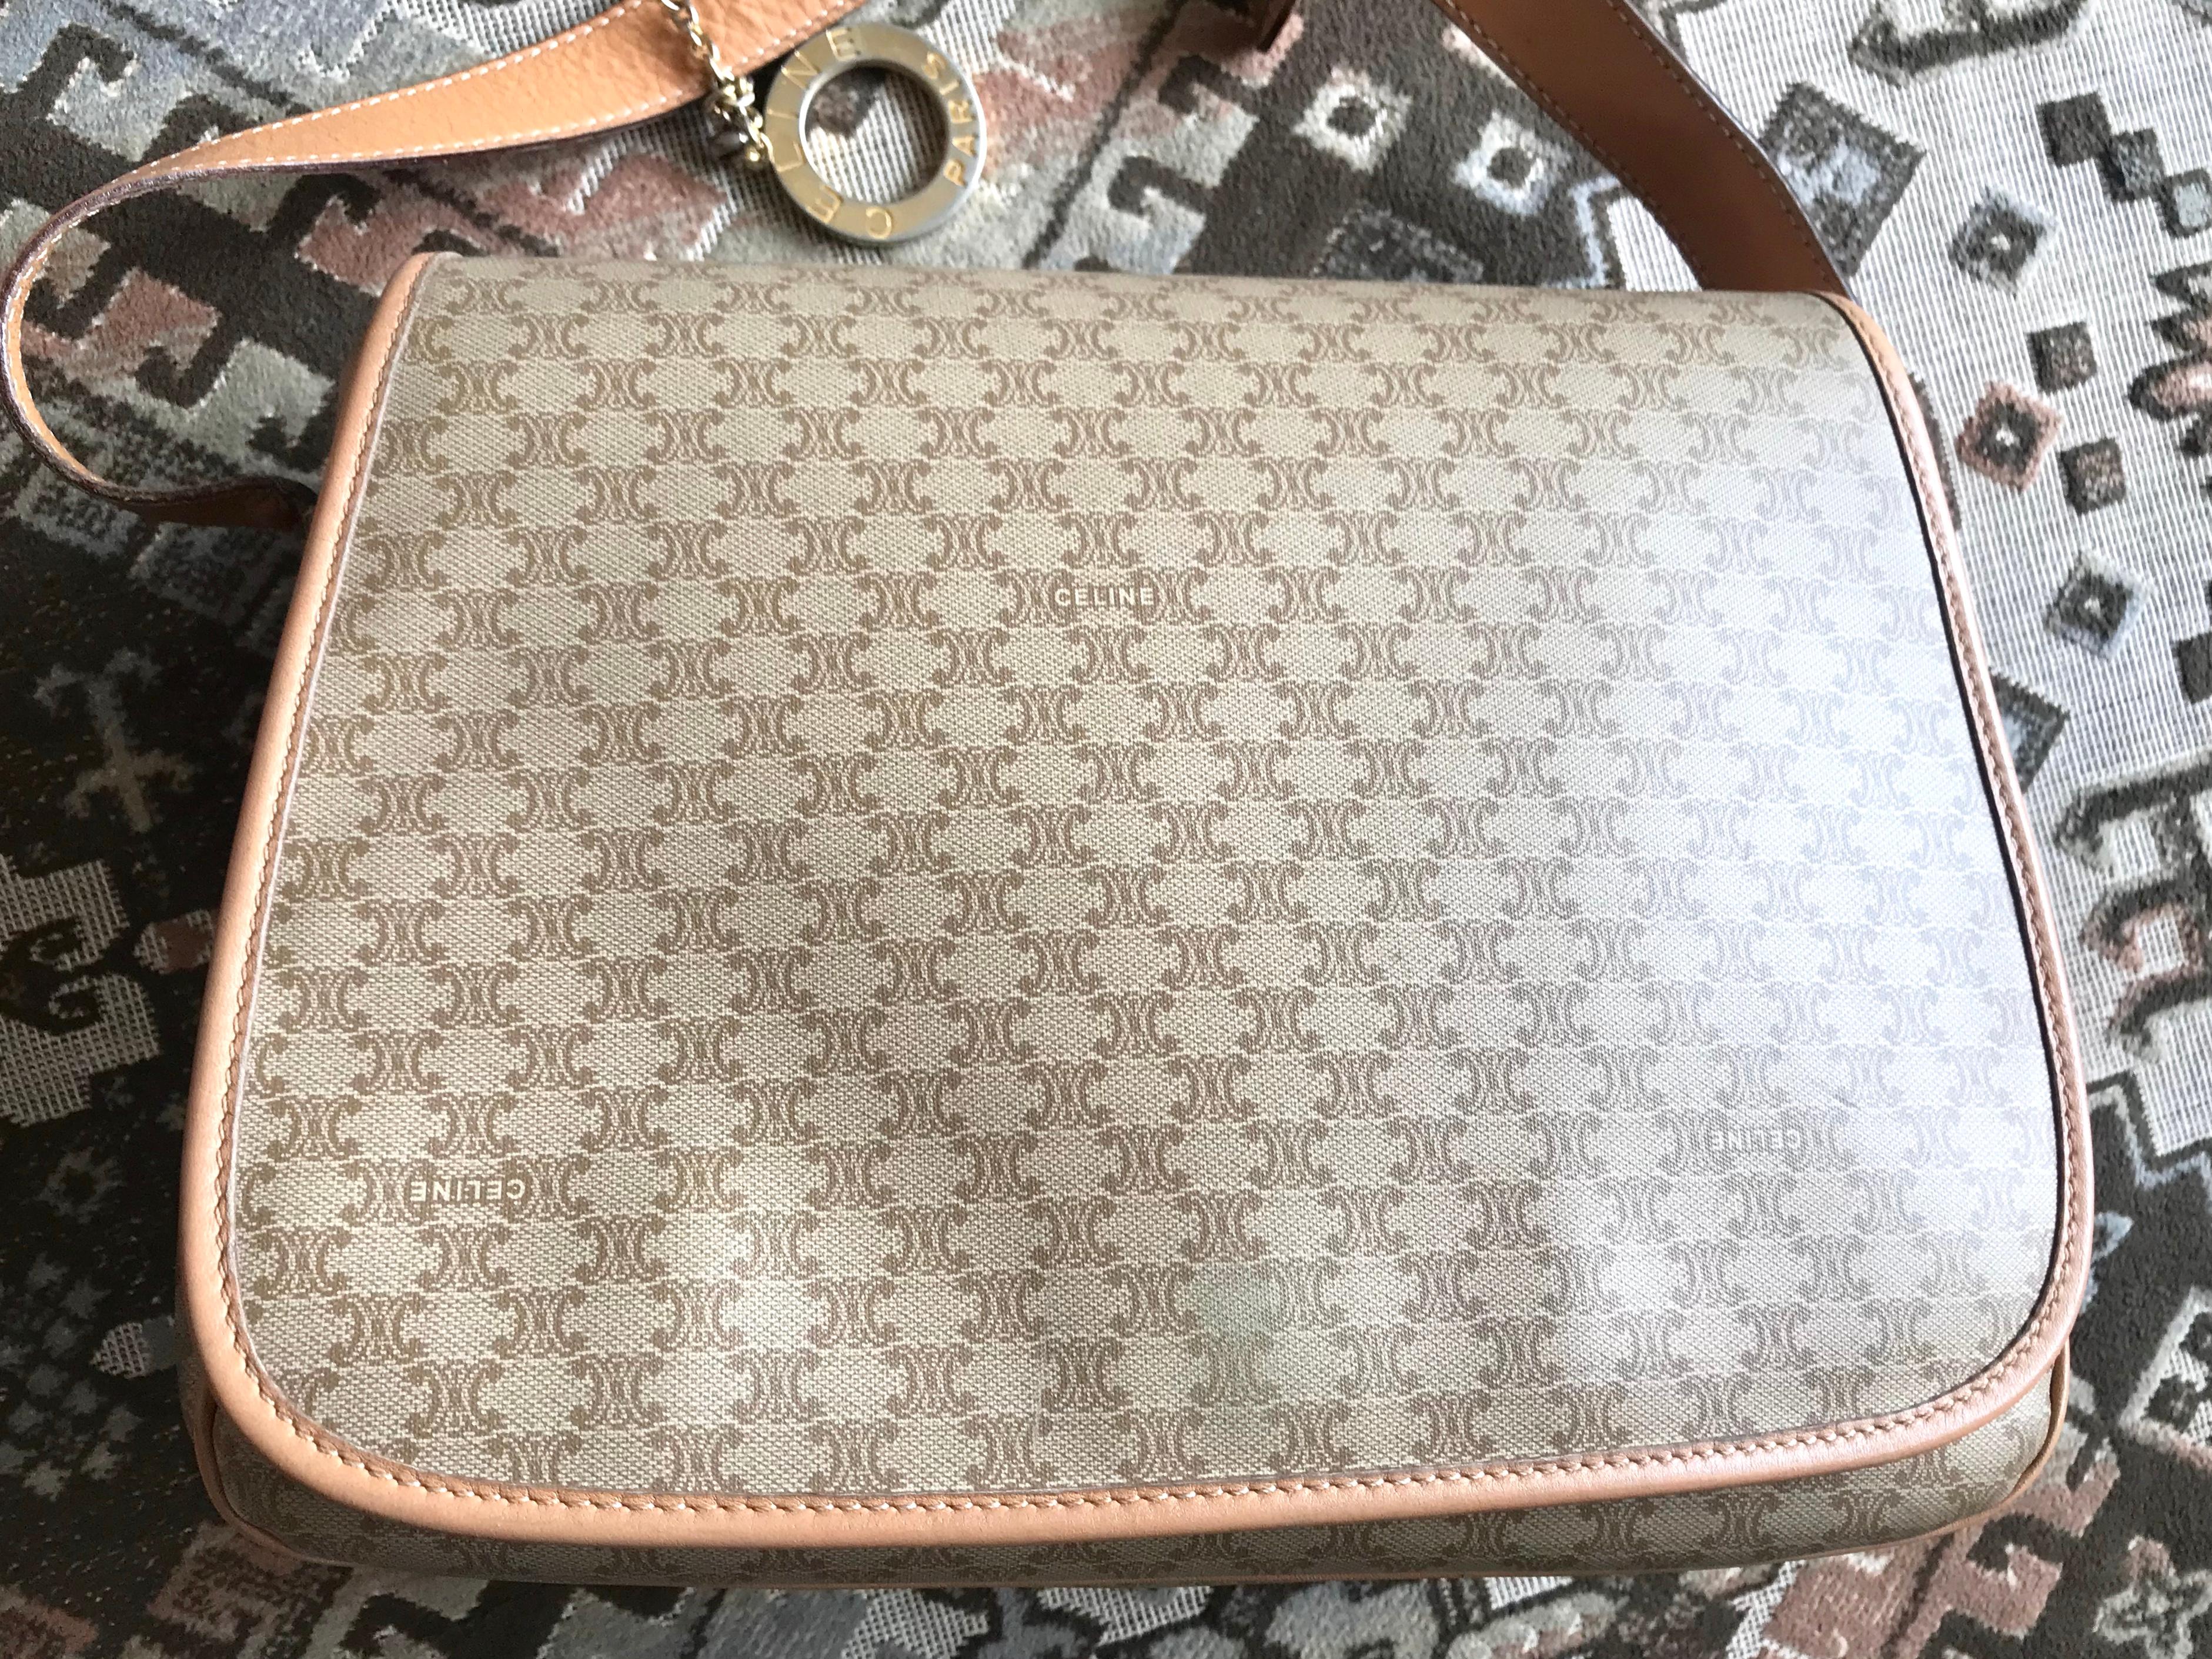 1990s. Vintage Celine beige macadam blaison pattern messenger bag with gold tone round logo motif charm. For daily use.

Introducing a vintage classic messenger style shoulder bag from CELINE, a blason macadam pattern for all generations.